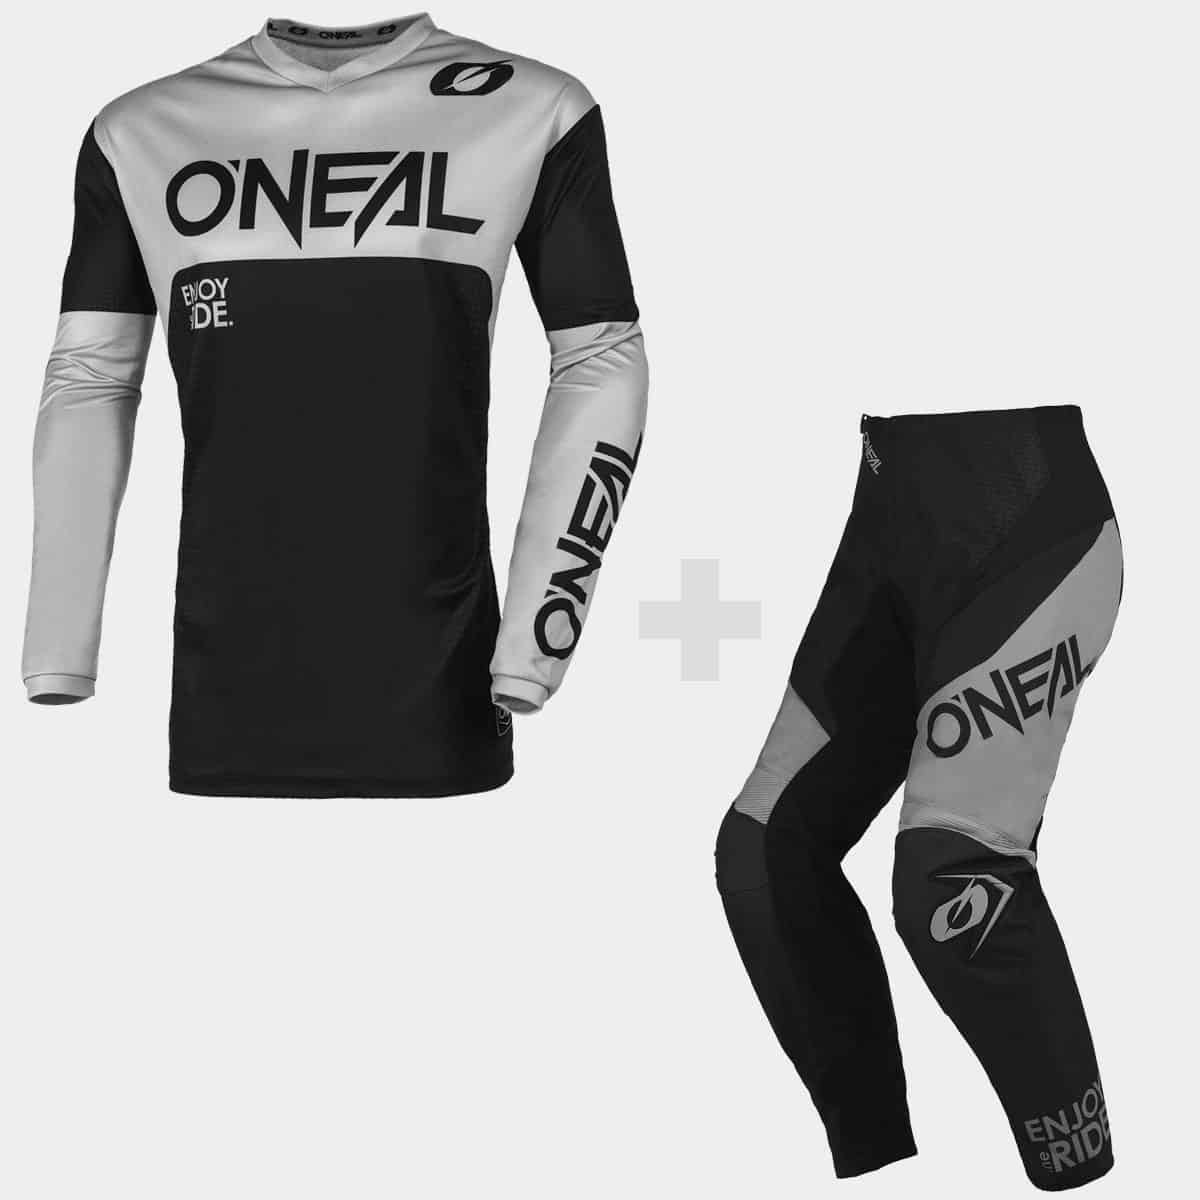 ONeal Element Offroad MX Kits Racewear Grey - BUY THE KIT & SAVE